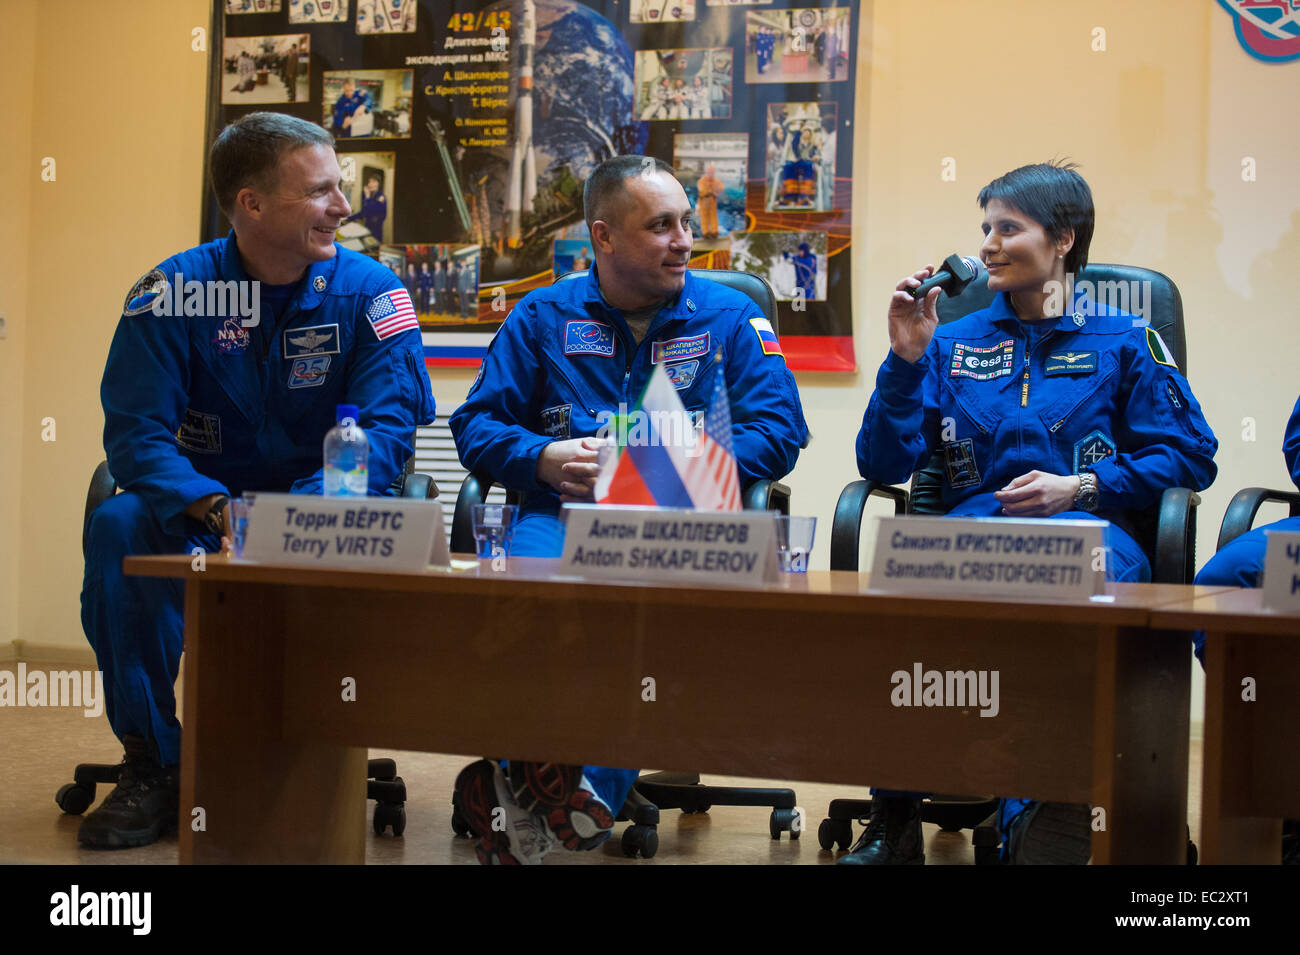 Expedition 42 prime crew members, Flight Engineer Terry Virts of NASA, left, Soyuz Commander Anton Shkaplerov of the Russian Federal Space Agency (Roscosmos), center, and Flight Engineer Samantha Cristoforetti of the European Space Agency (ESA), right, are seen during a press conference held at the Cosmonaut Hotel in Baikonur, Kazakhstan on Saturday, Nov. 22, 2014. The mission is set to launch Nov. 24 from the Baikonur Stock Photo